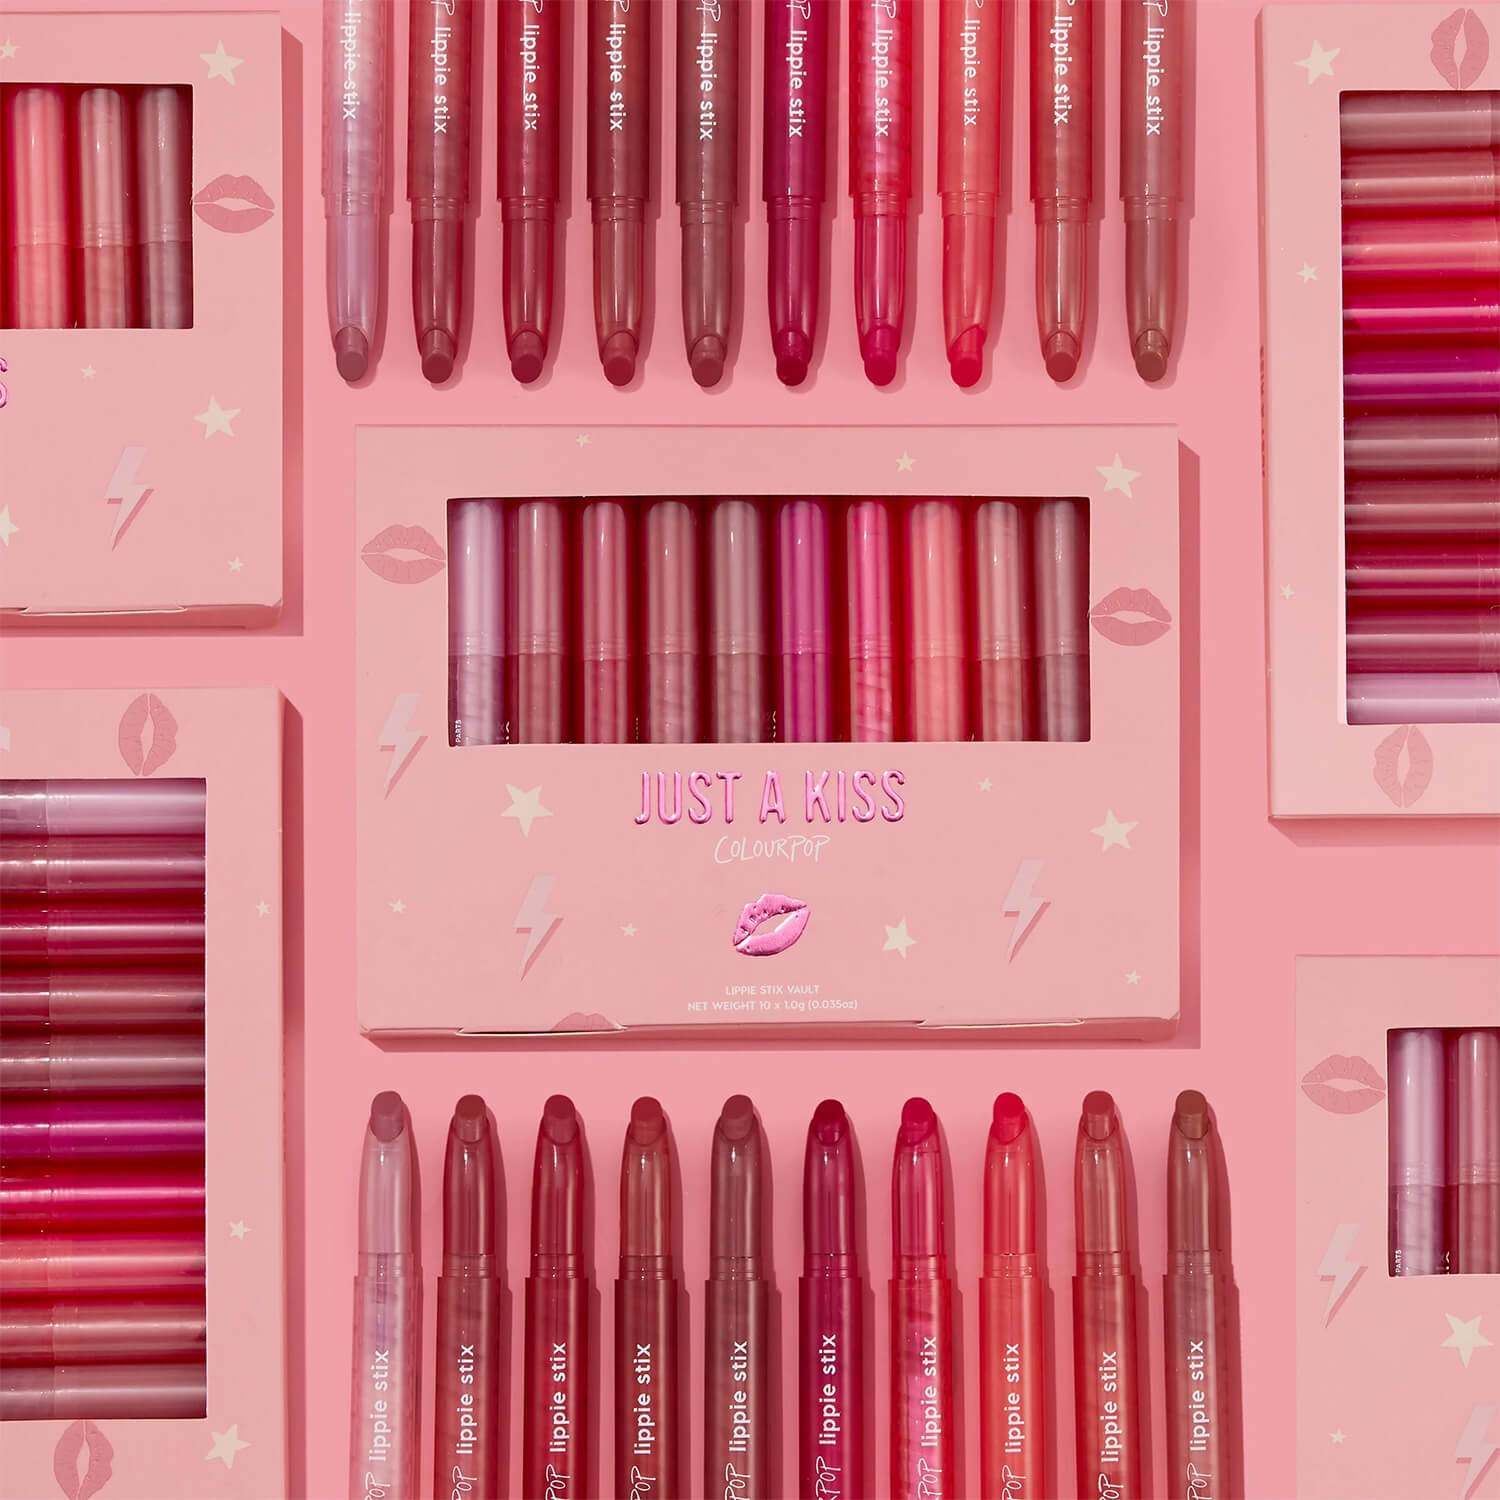 Shop Colourpop lippie stix gift set for her available at Heygirl.pk for delivery in Pakistan